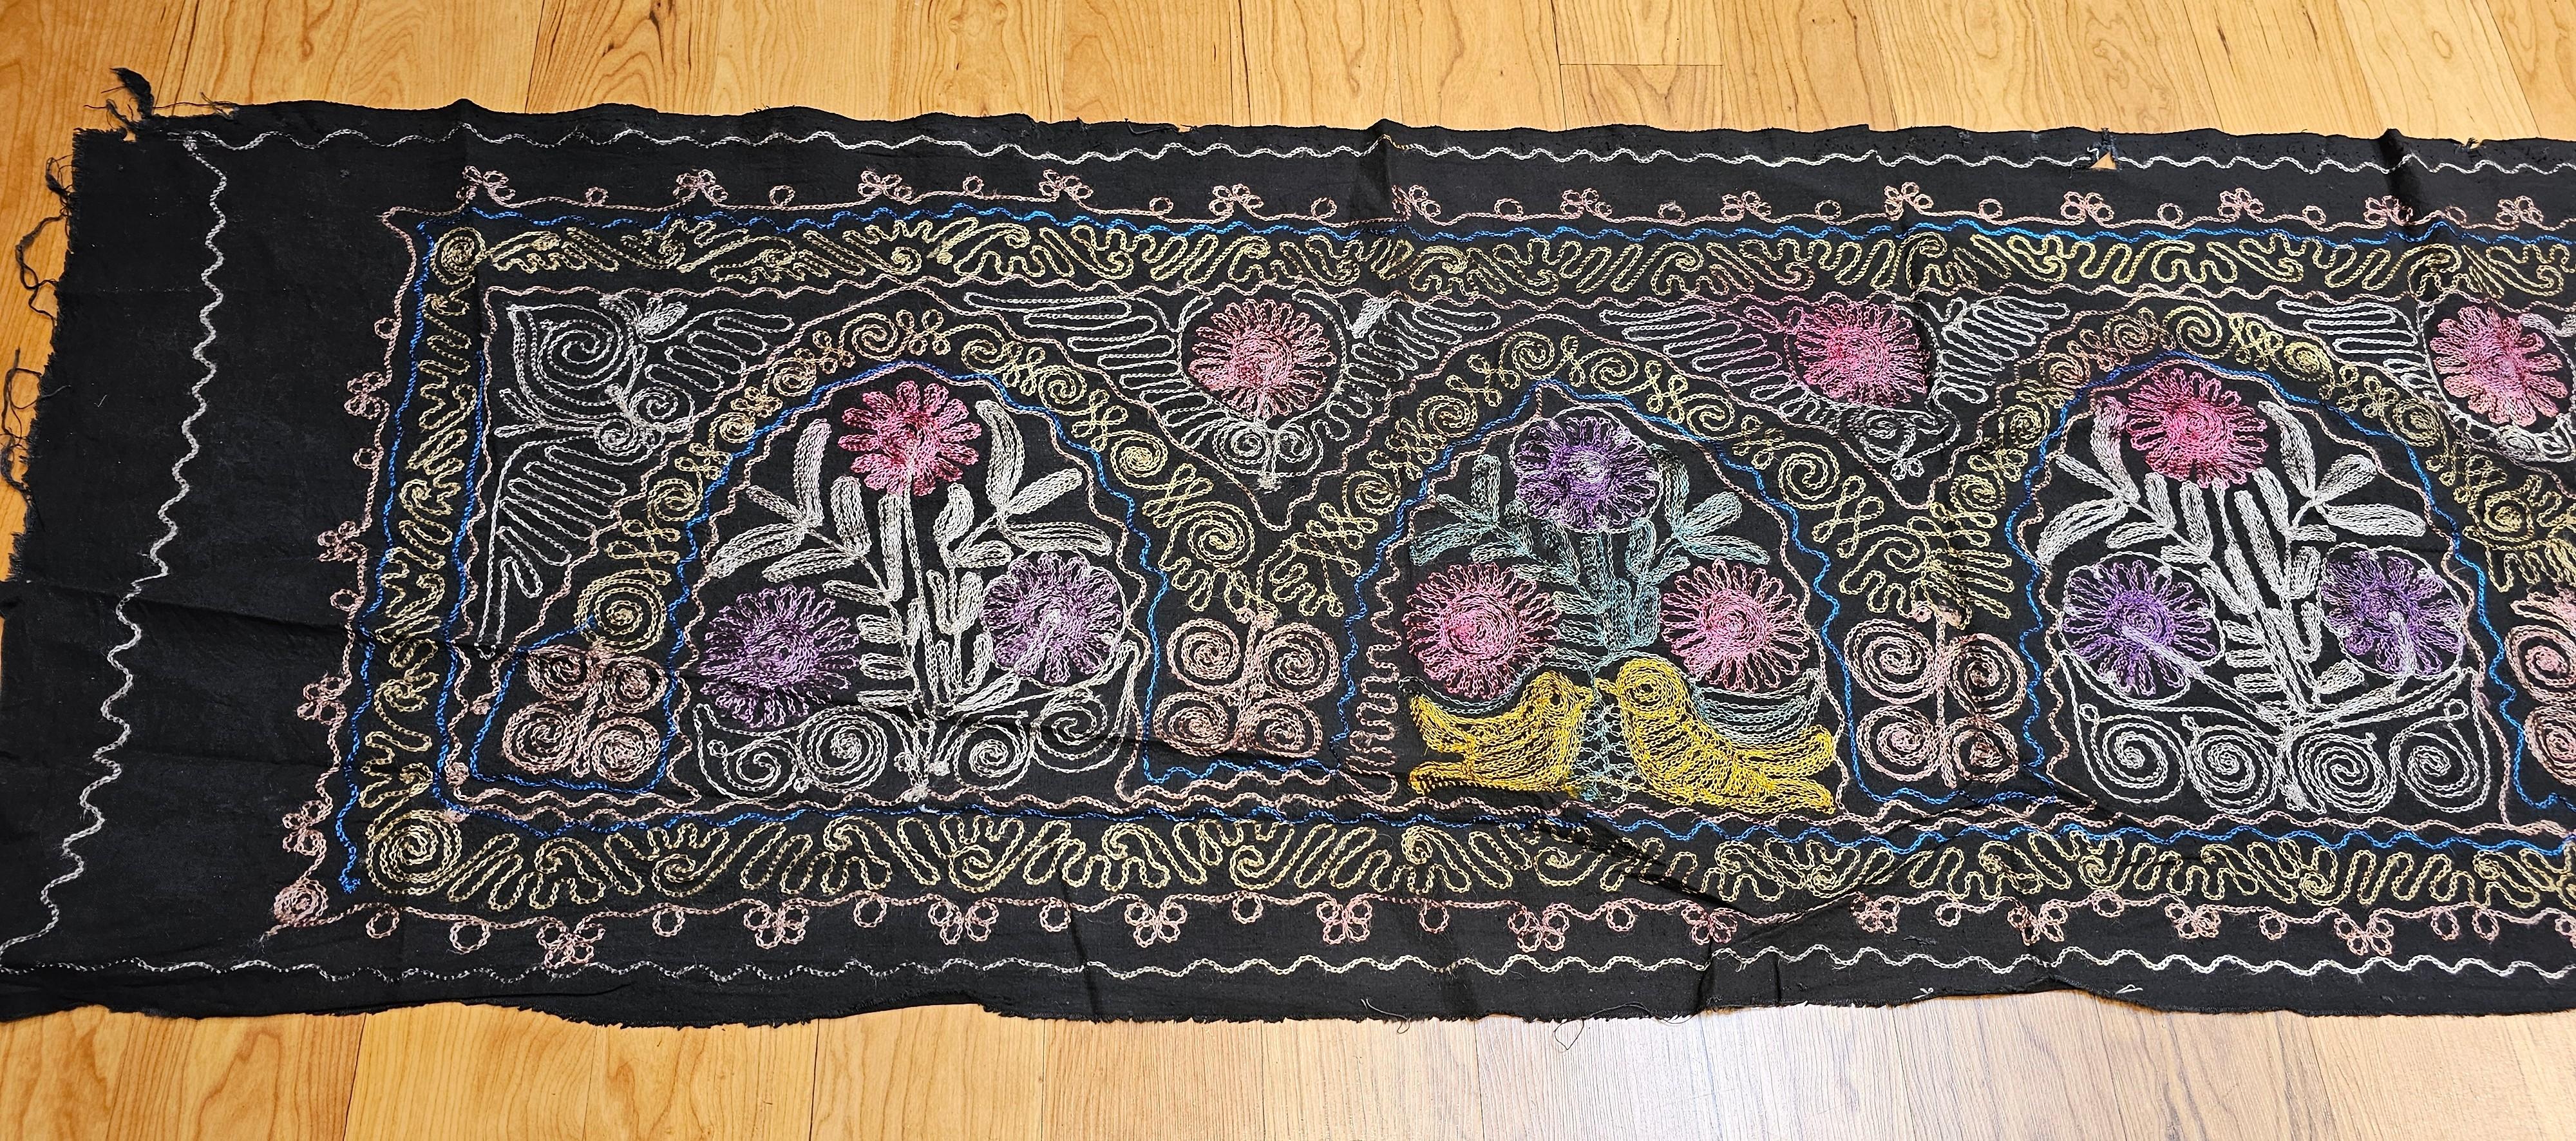 Vintage Uzbek Suzani Silk Embroidery in Black, Blue, Purple, Yellow, Red For Sale 2